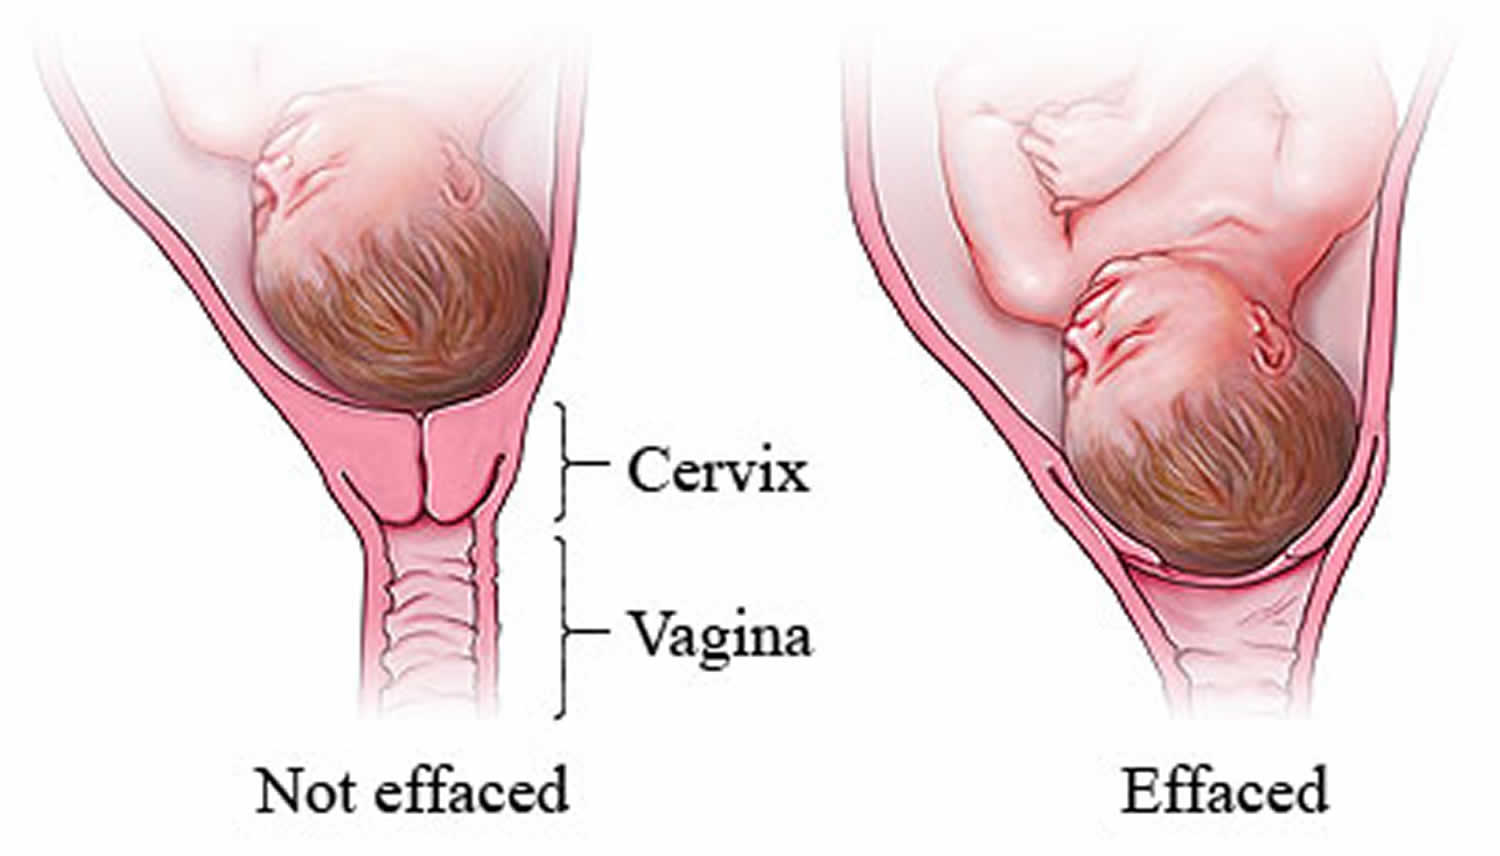 First stage: Thinning and opening of the cervix